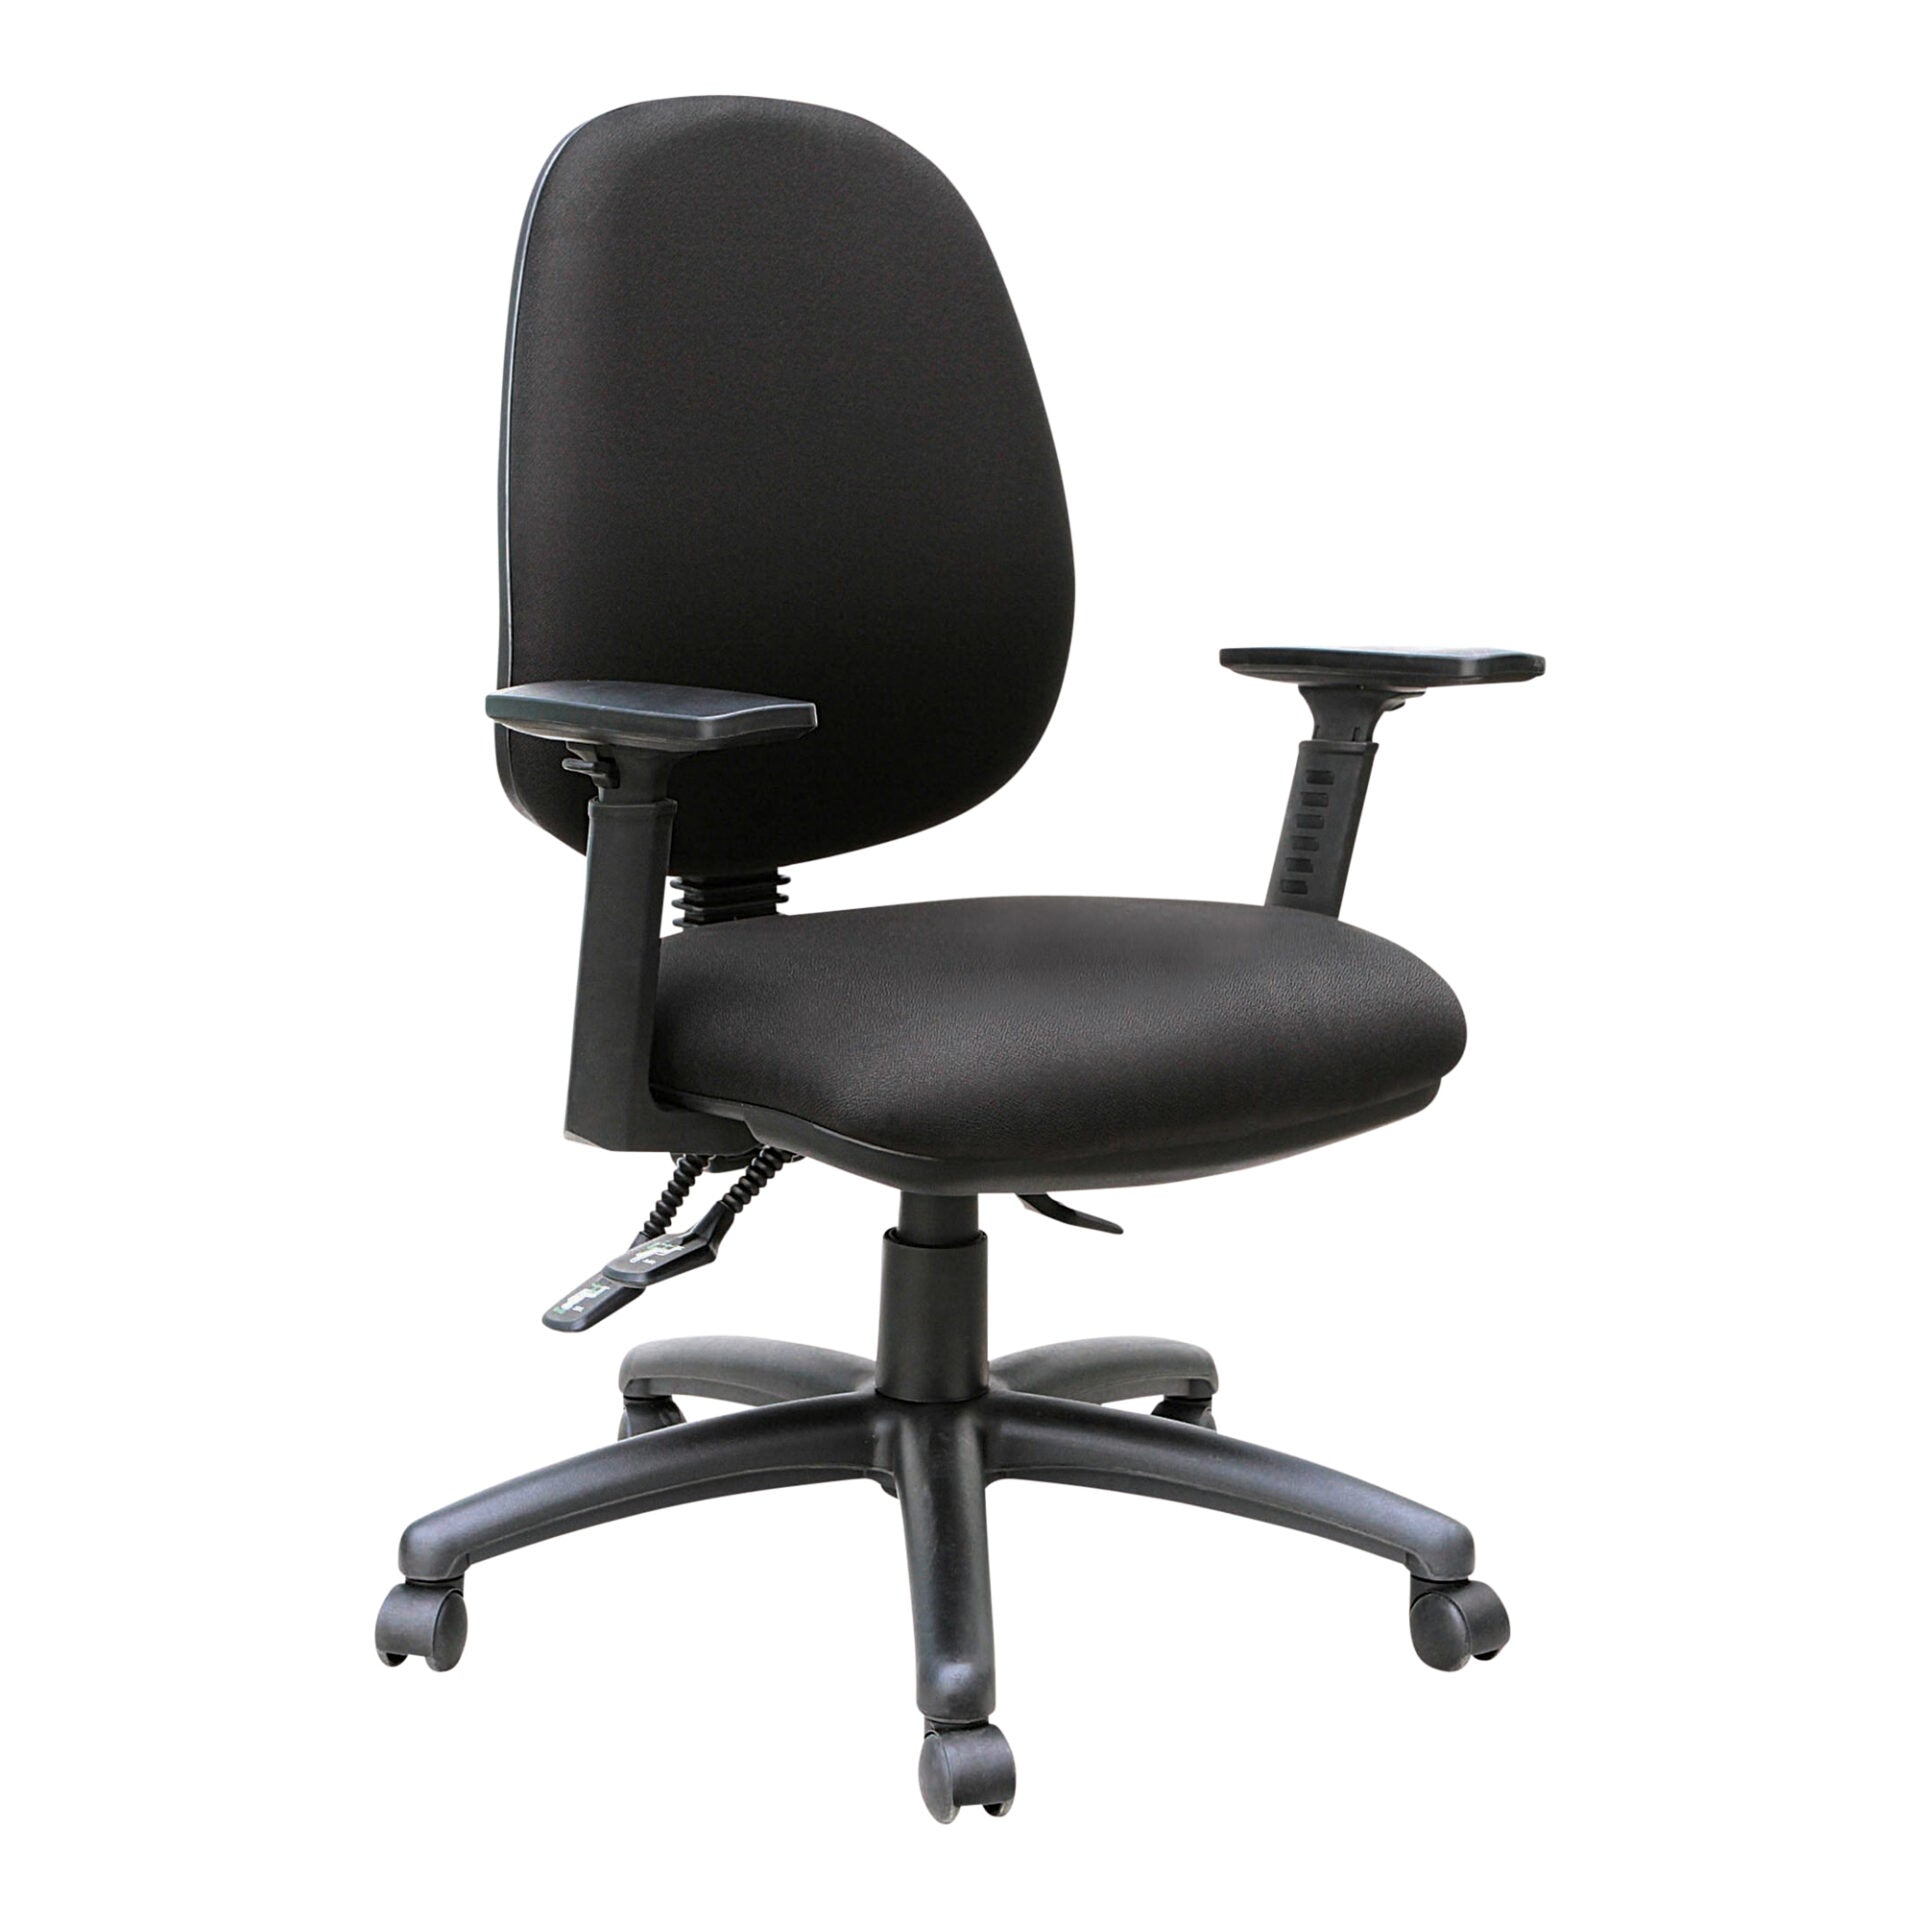 Mondo Java high-back task chair in black, front view, with height adjustable arms.